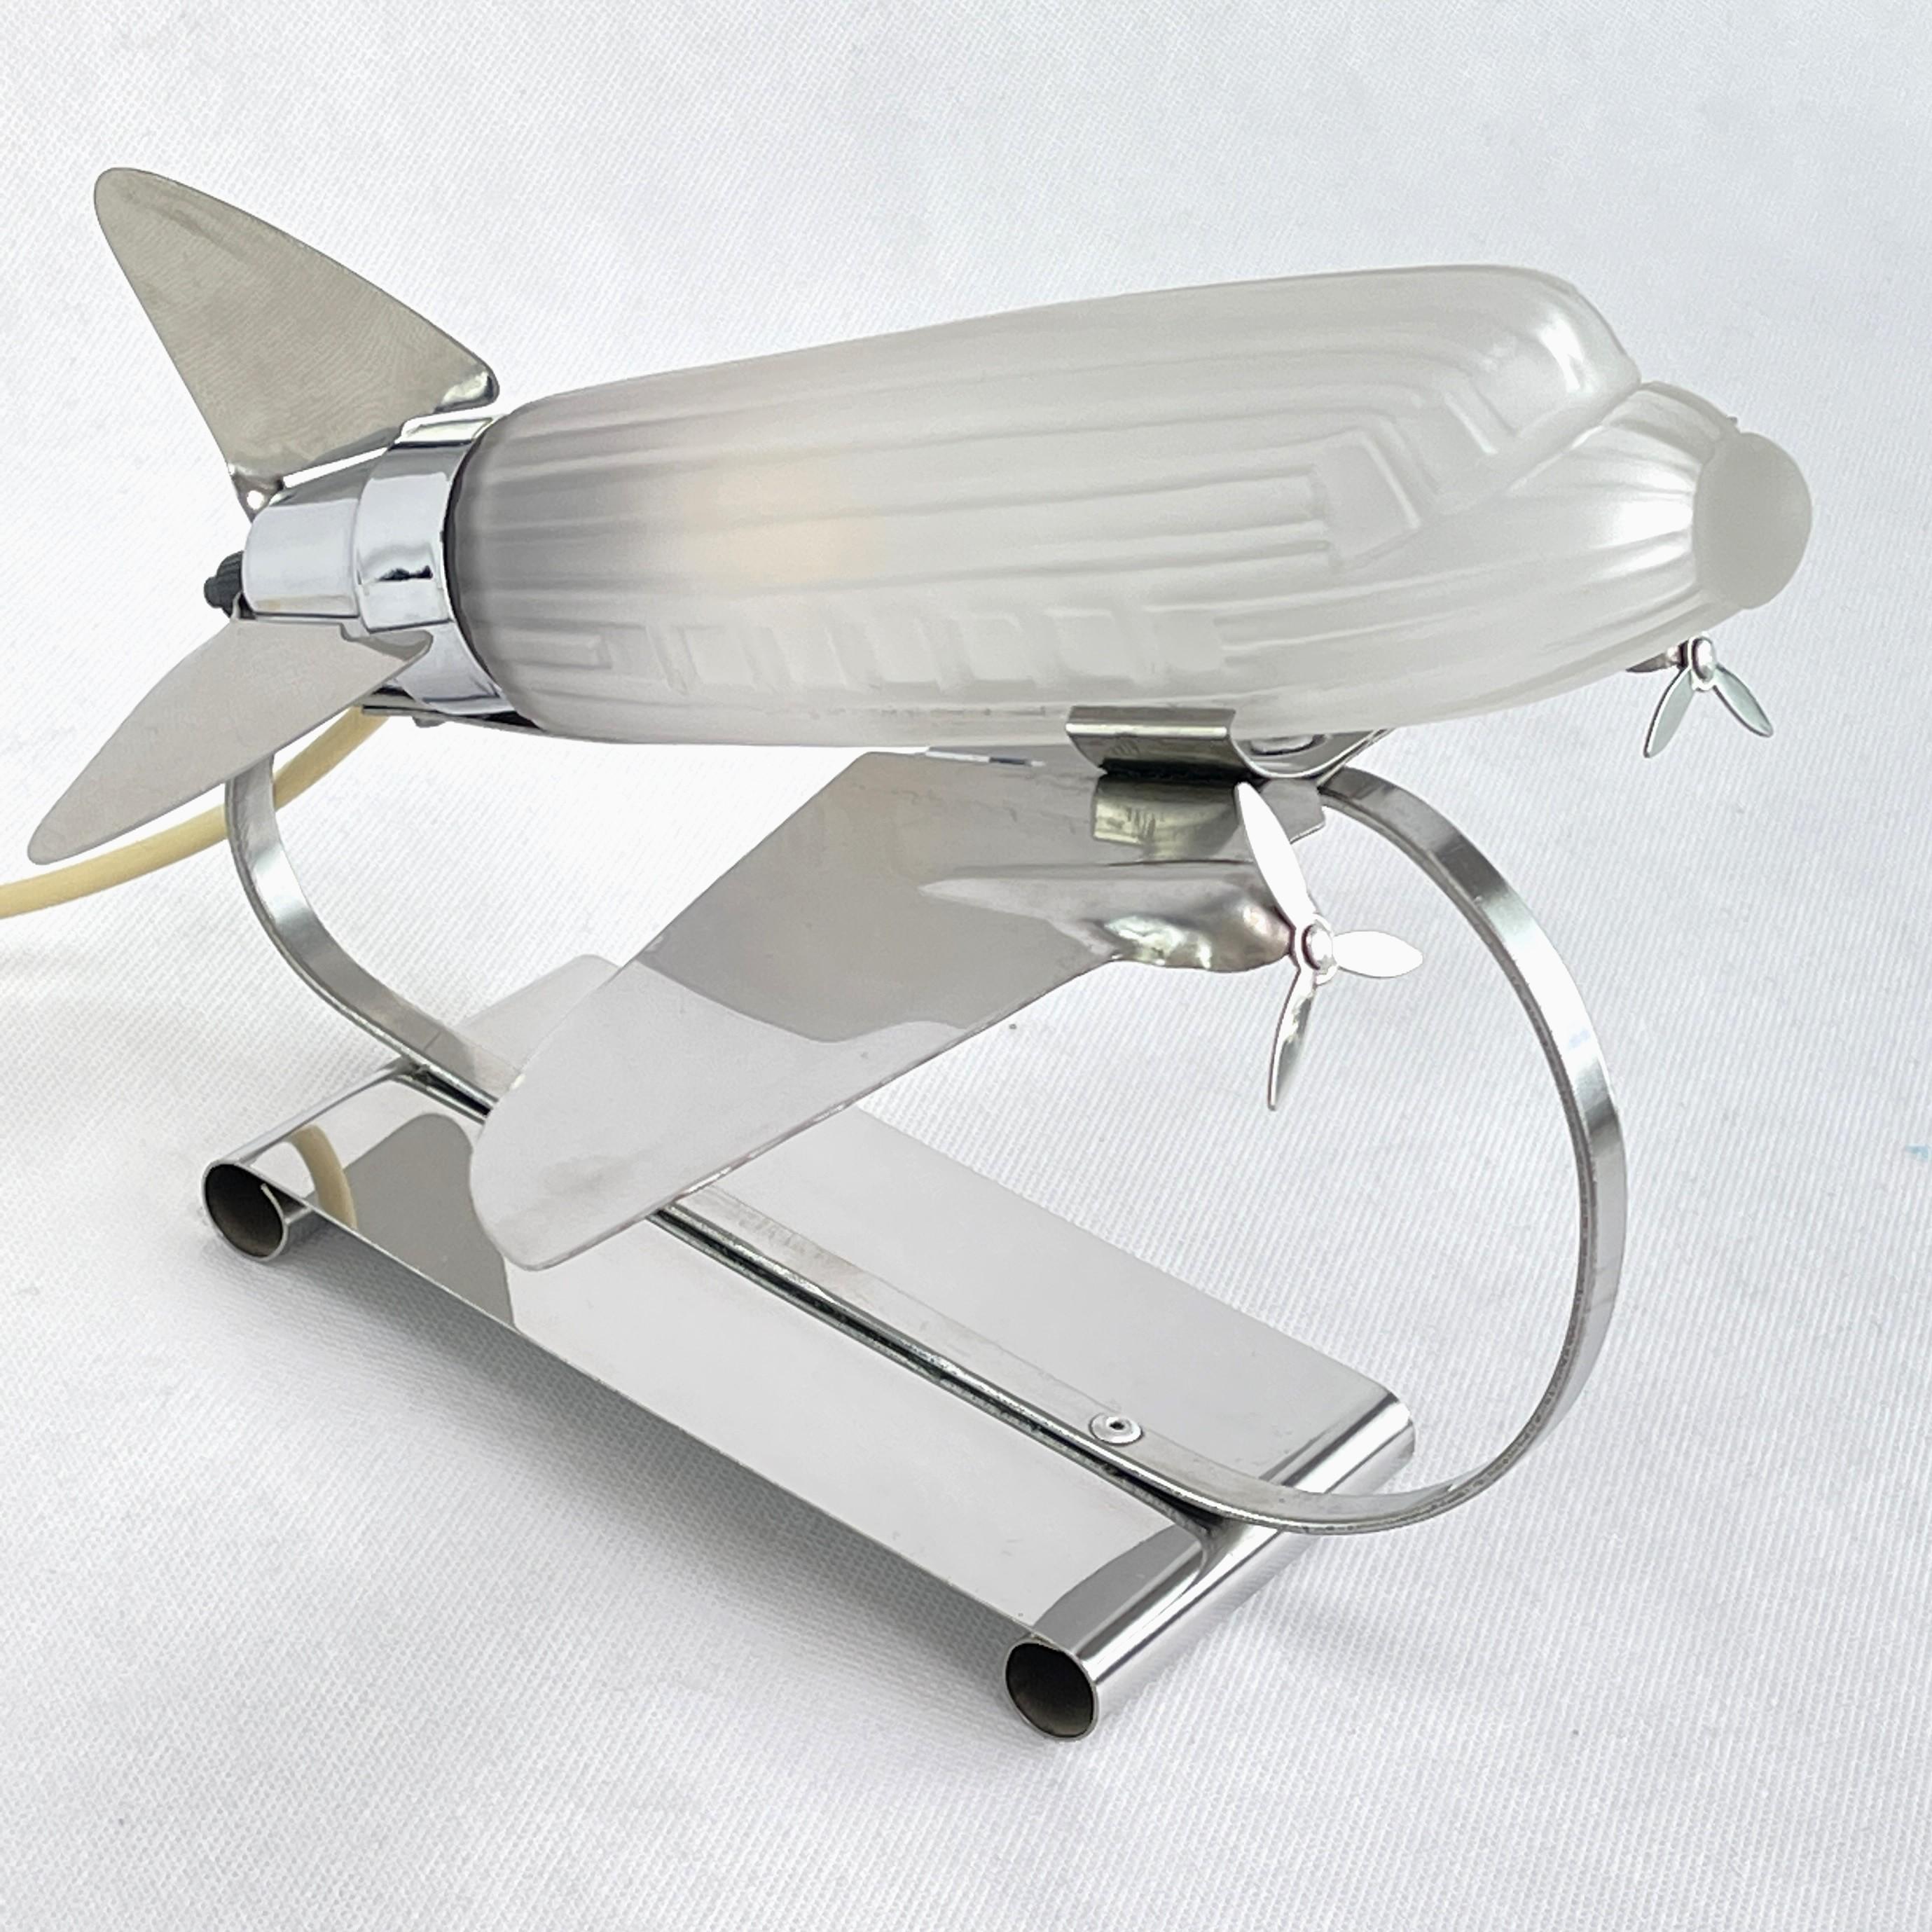 Space Age Airplane Table lamp by Sarsaparilla - 1970s

The Sarsaparilla airplane lamp is from 1978 (design). This lamp in Art Deco style and is a real classic. This original table lamp captivates with its simple and sober Art Deco design. The lamp